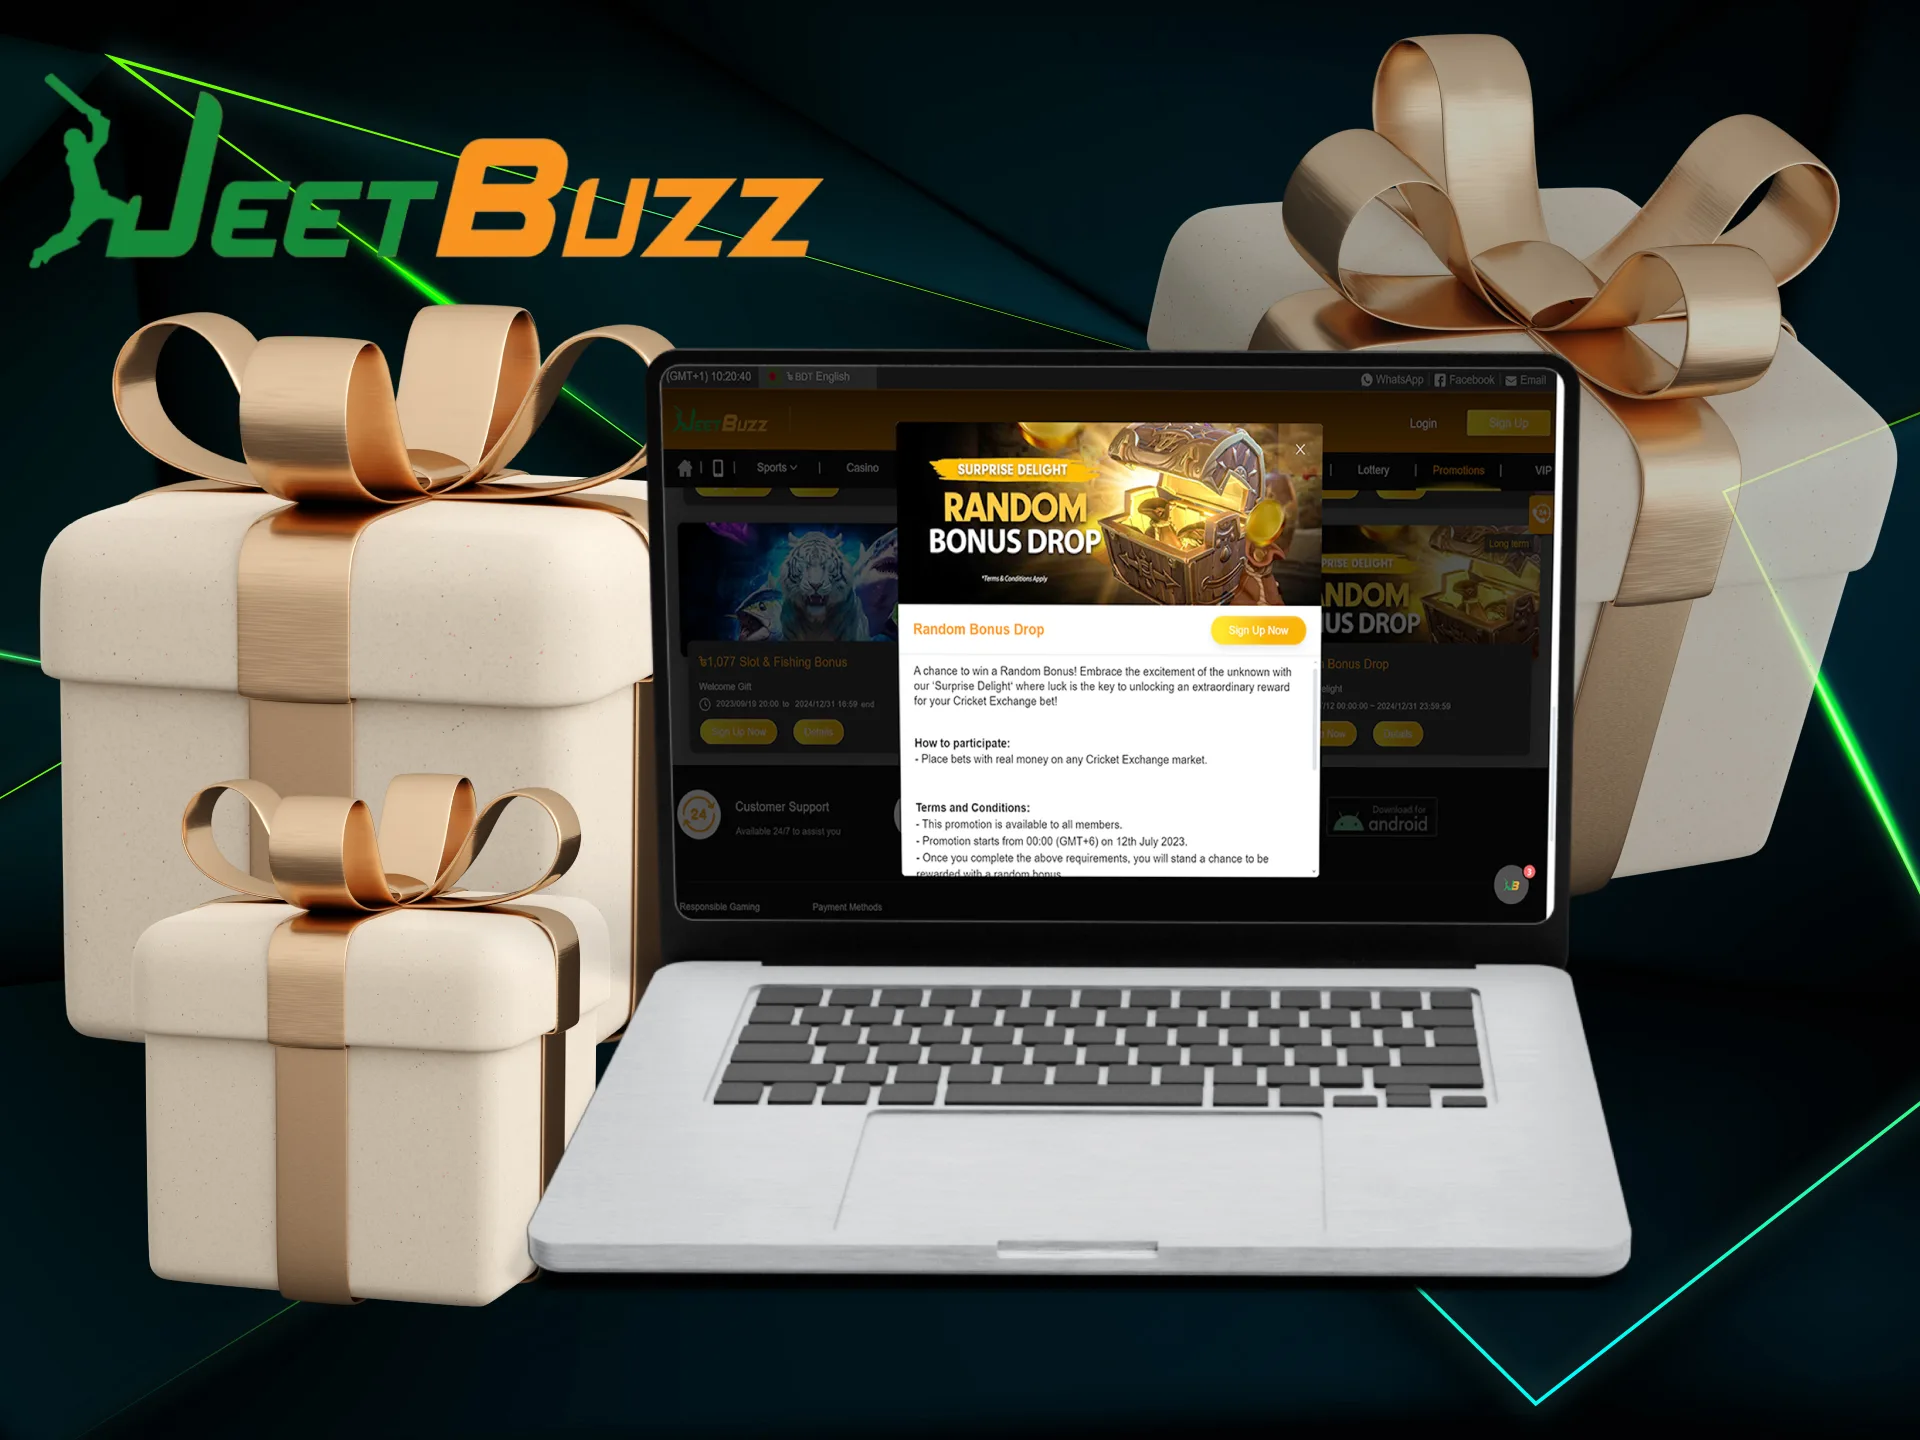 Invite your friends to JeetBuzz and win free bonuses.